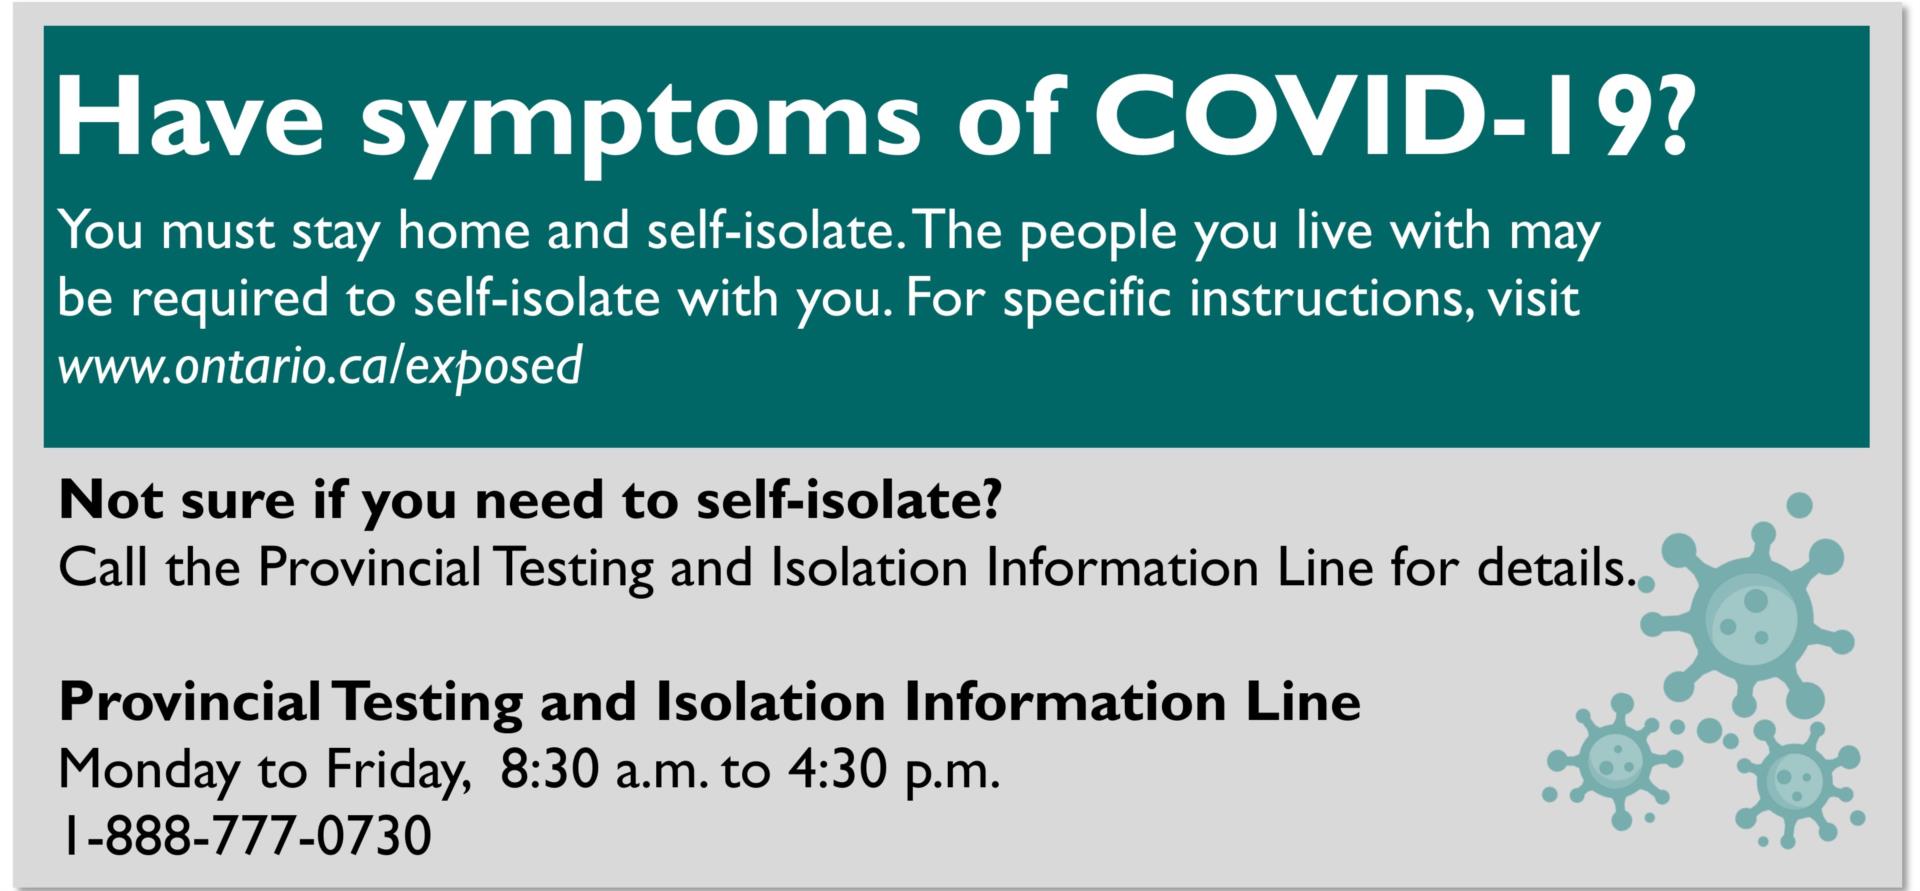 Provincial Testing and Isolation Information Line 1-888-777-0730